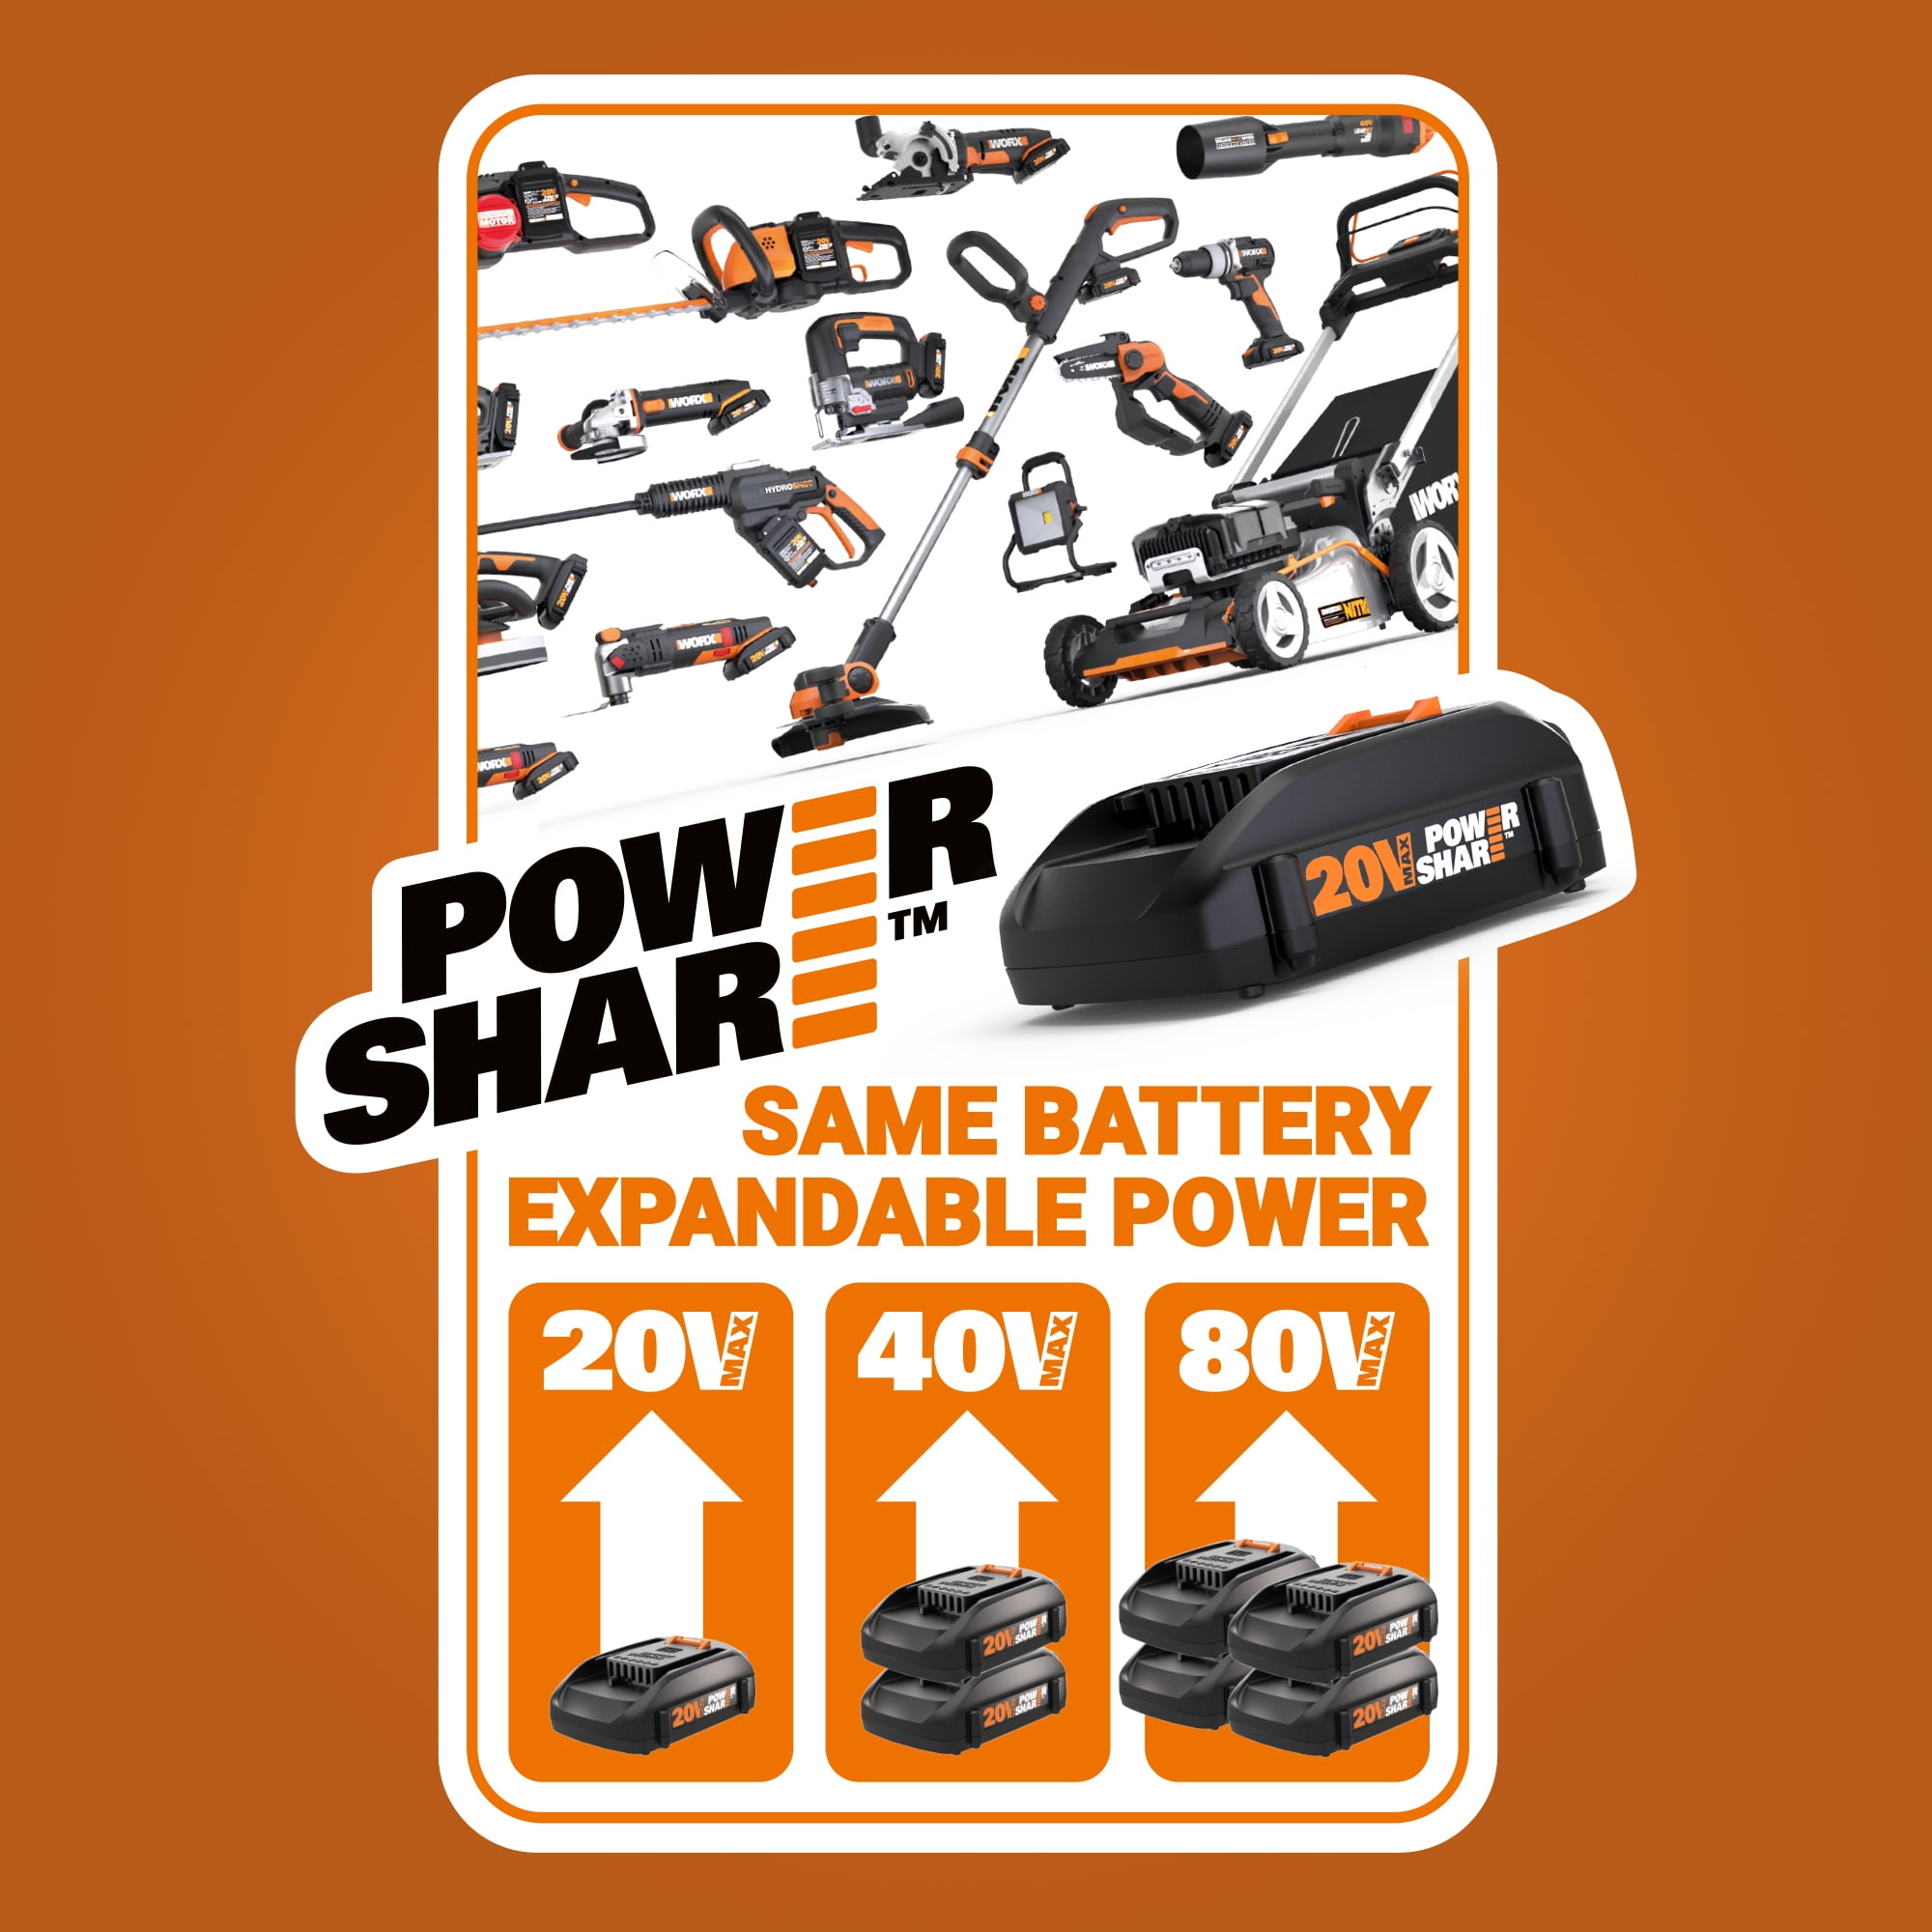 WORX 20V Brushless Compact 13mm Drill Driver Skin (Tool only - Battery /  Charger sold separately) - WX102.9 - WORX Australia